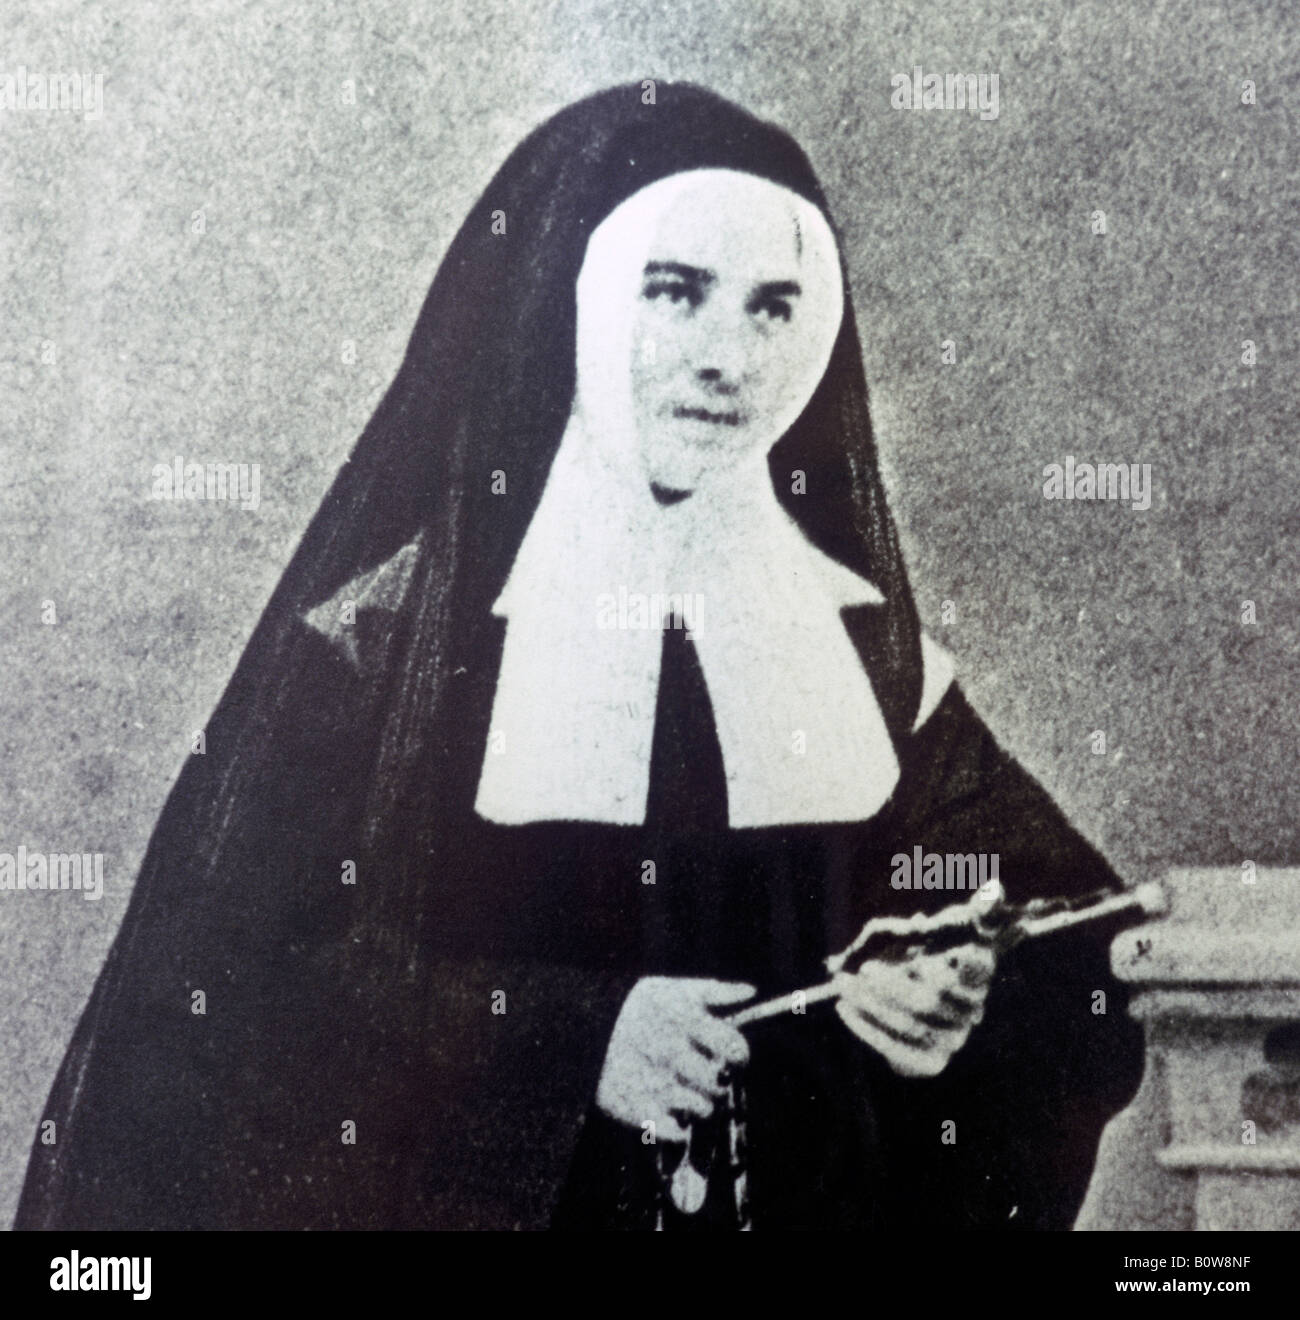 Photo of St. Bernadette of Lourdes taking her vows in April 1868, St. Gildard Monastery Museum, Nevers, Nievre Department, Fran Stock Photo